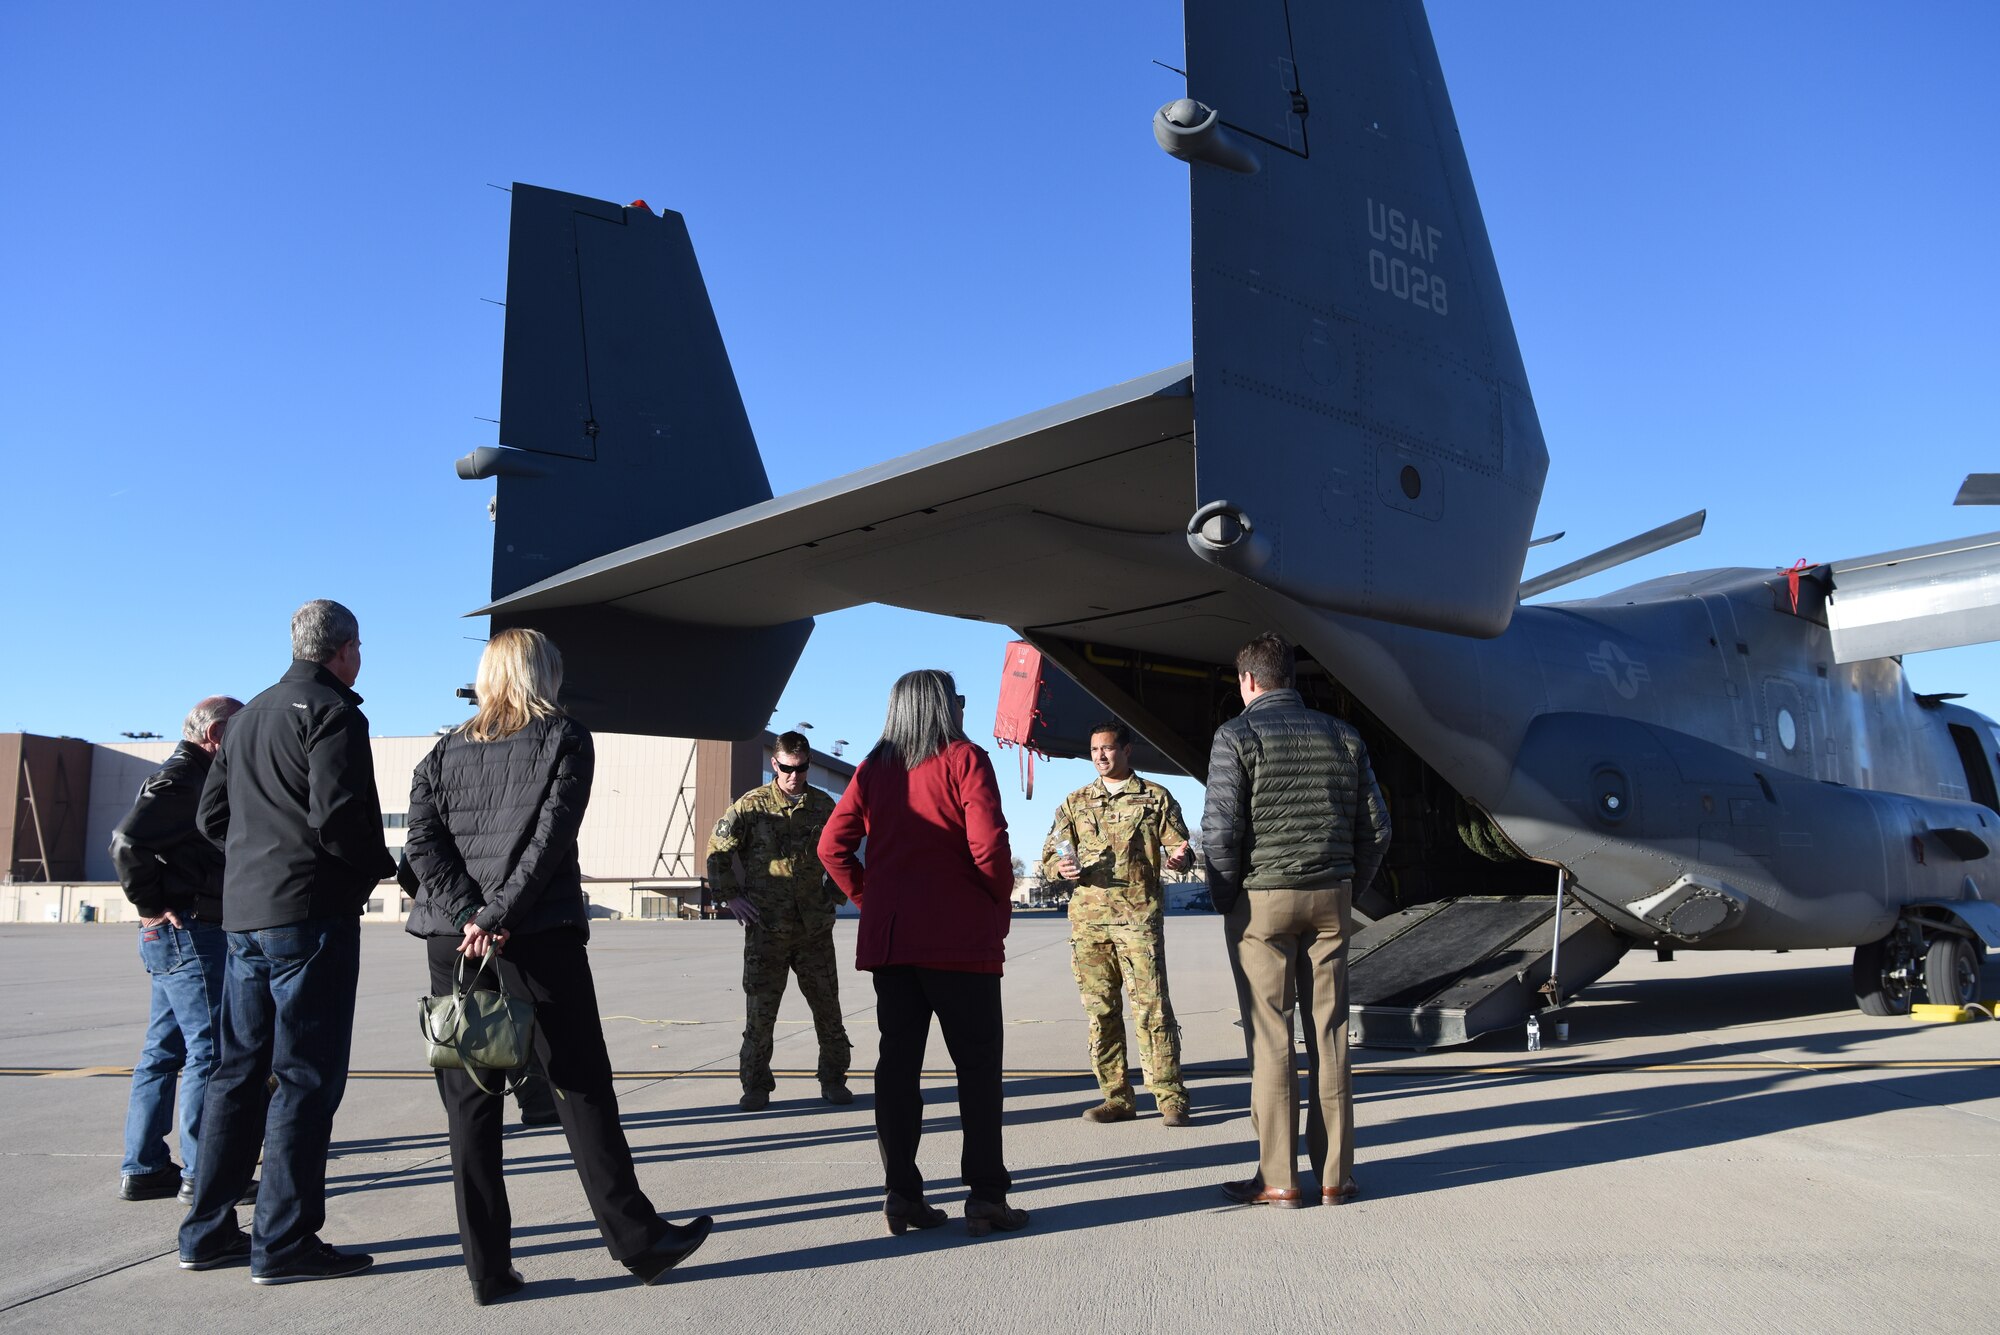 U.S. Air Force Major Arjun Rau, 58th Training Squadron CV-22 Osprey evaluator pilot, discusses the capabilities of the CV-22 to members of the Kirtland Partnership Committee at Kirtland Air Force Base, N.M., Nov. 26, 2018. The KPC is a local civic group that advocates for Team Kirtland and its part of the National Security Complex. (U.S. Air Force photo by Senior Airman Eli Chevalier)